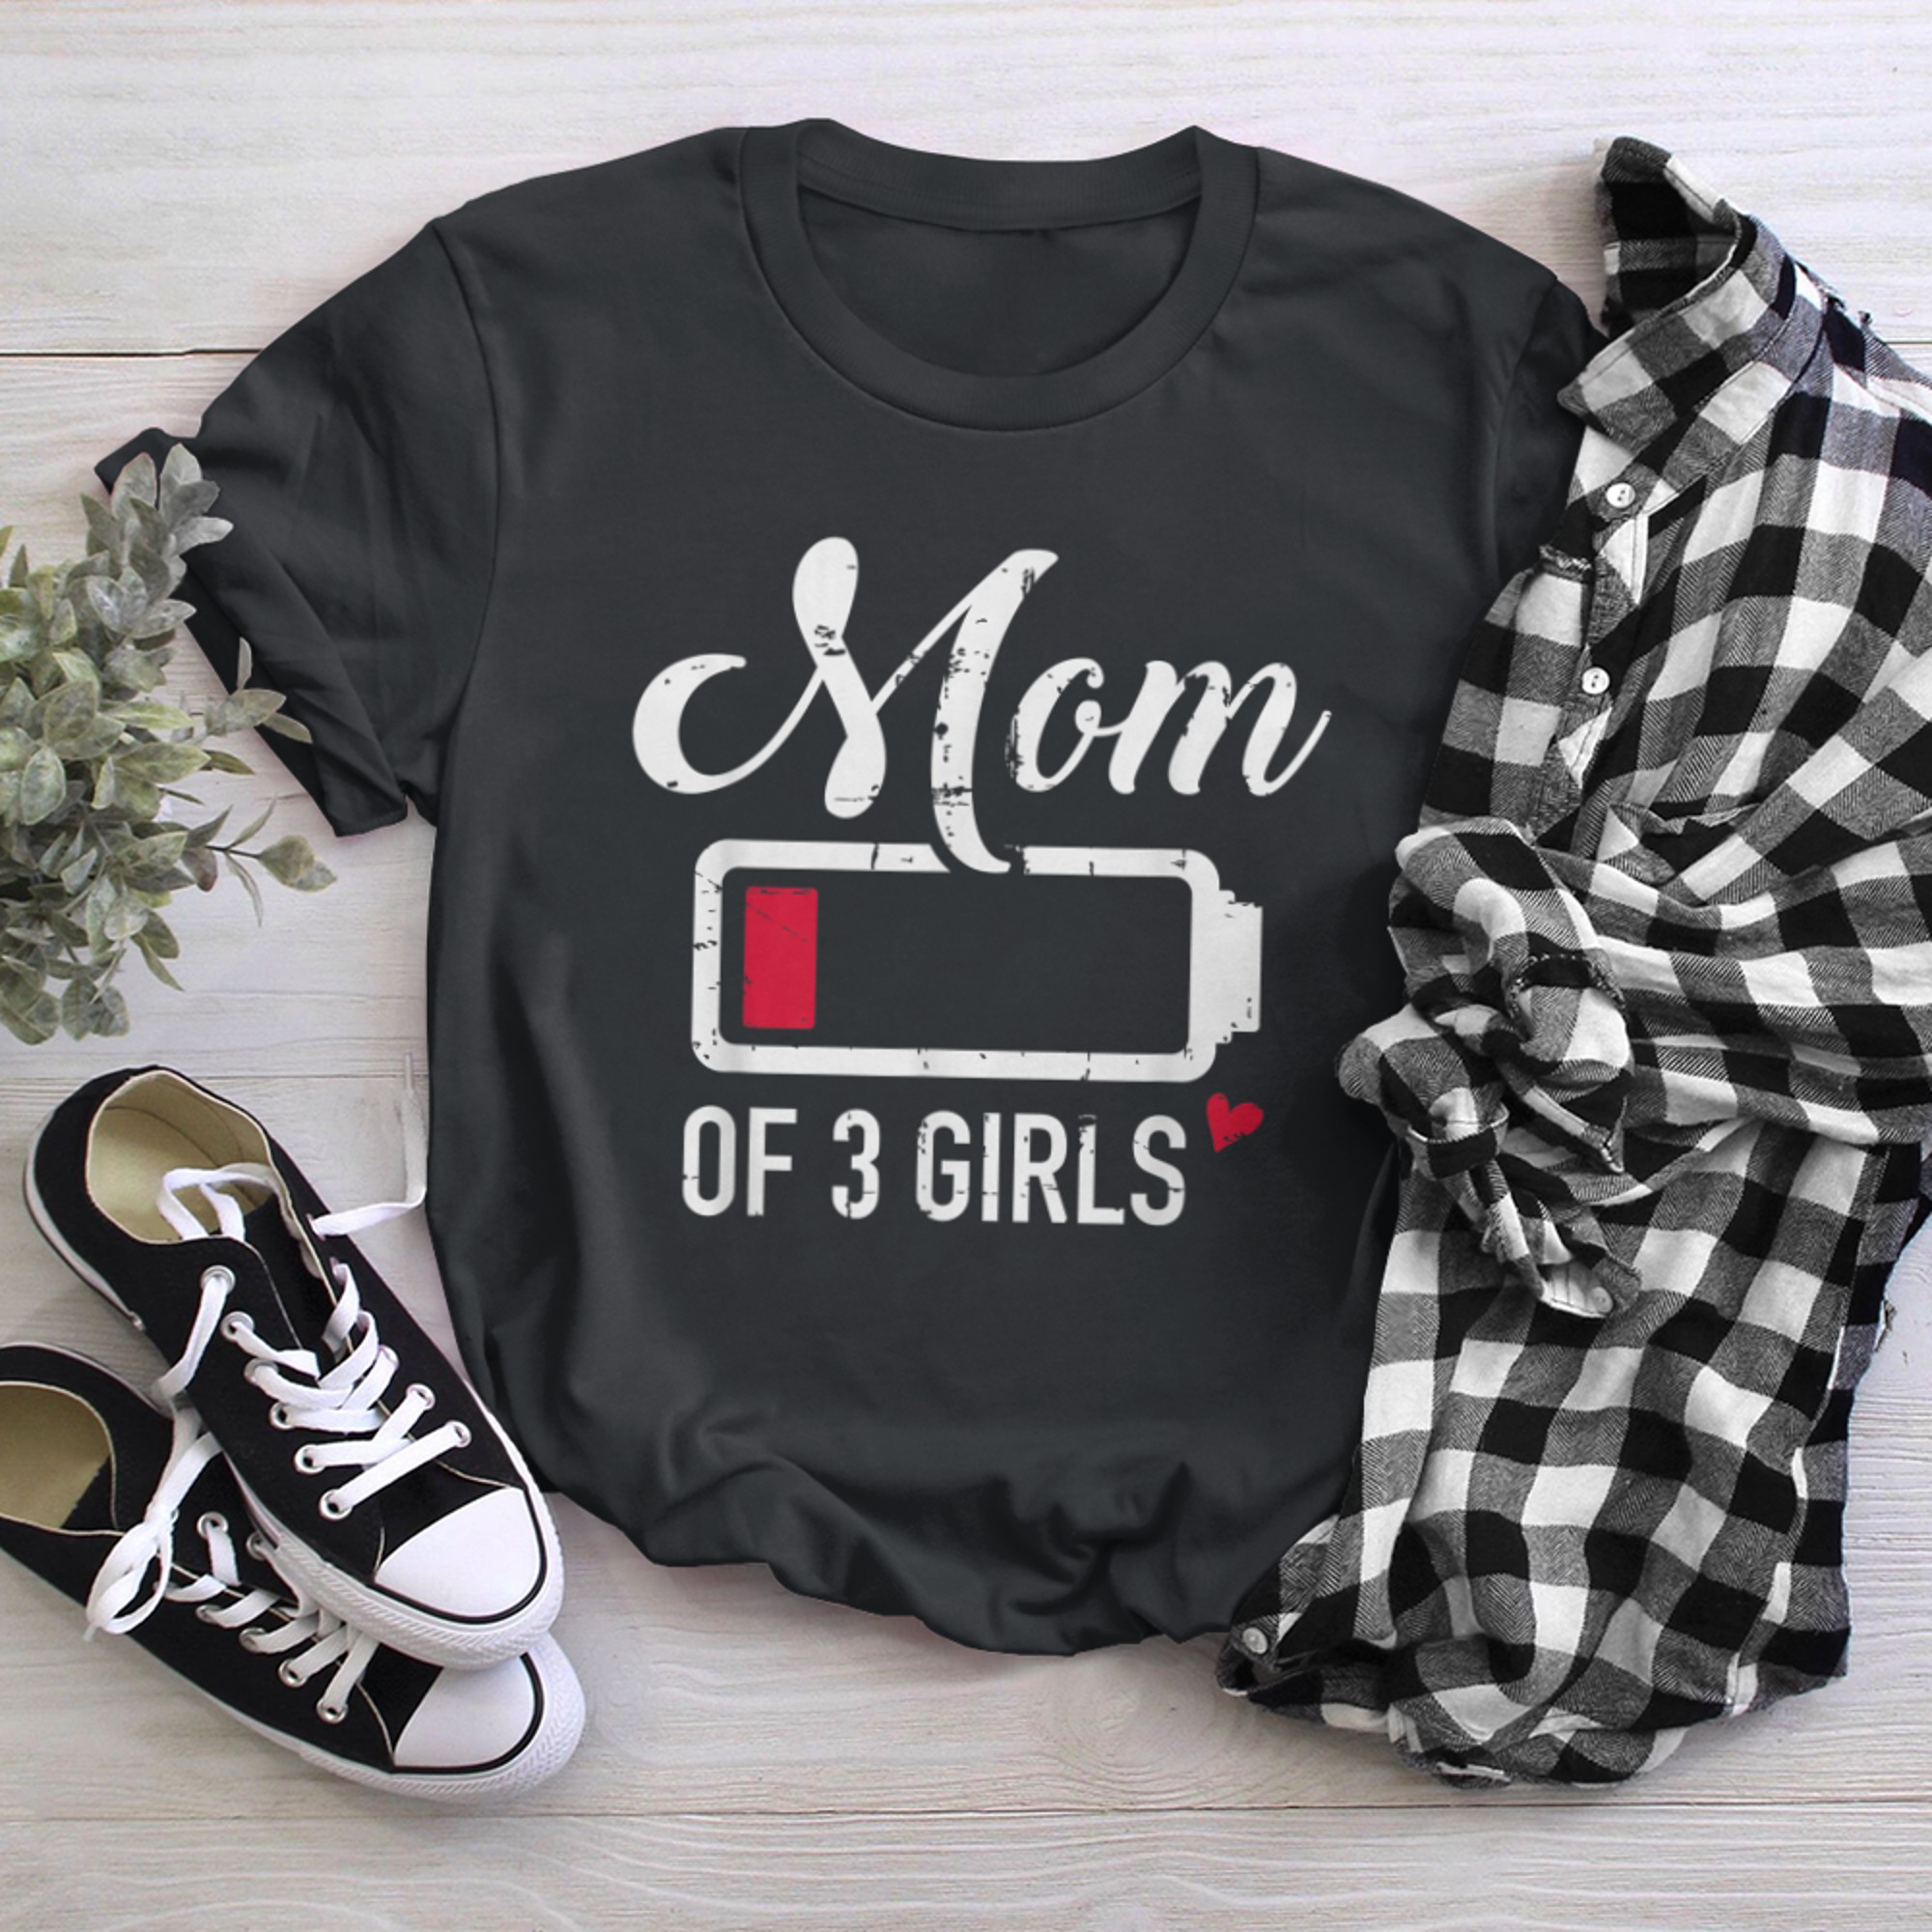 Mom of Low Battery t-shirt black